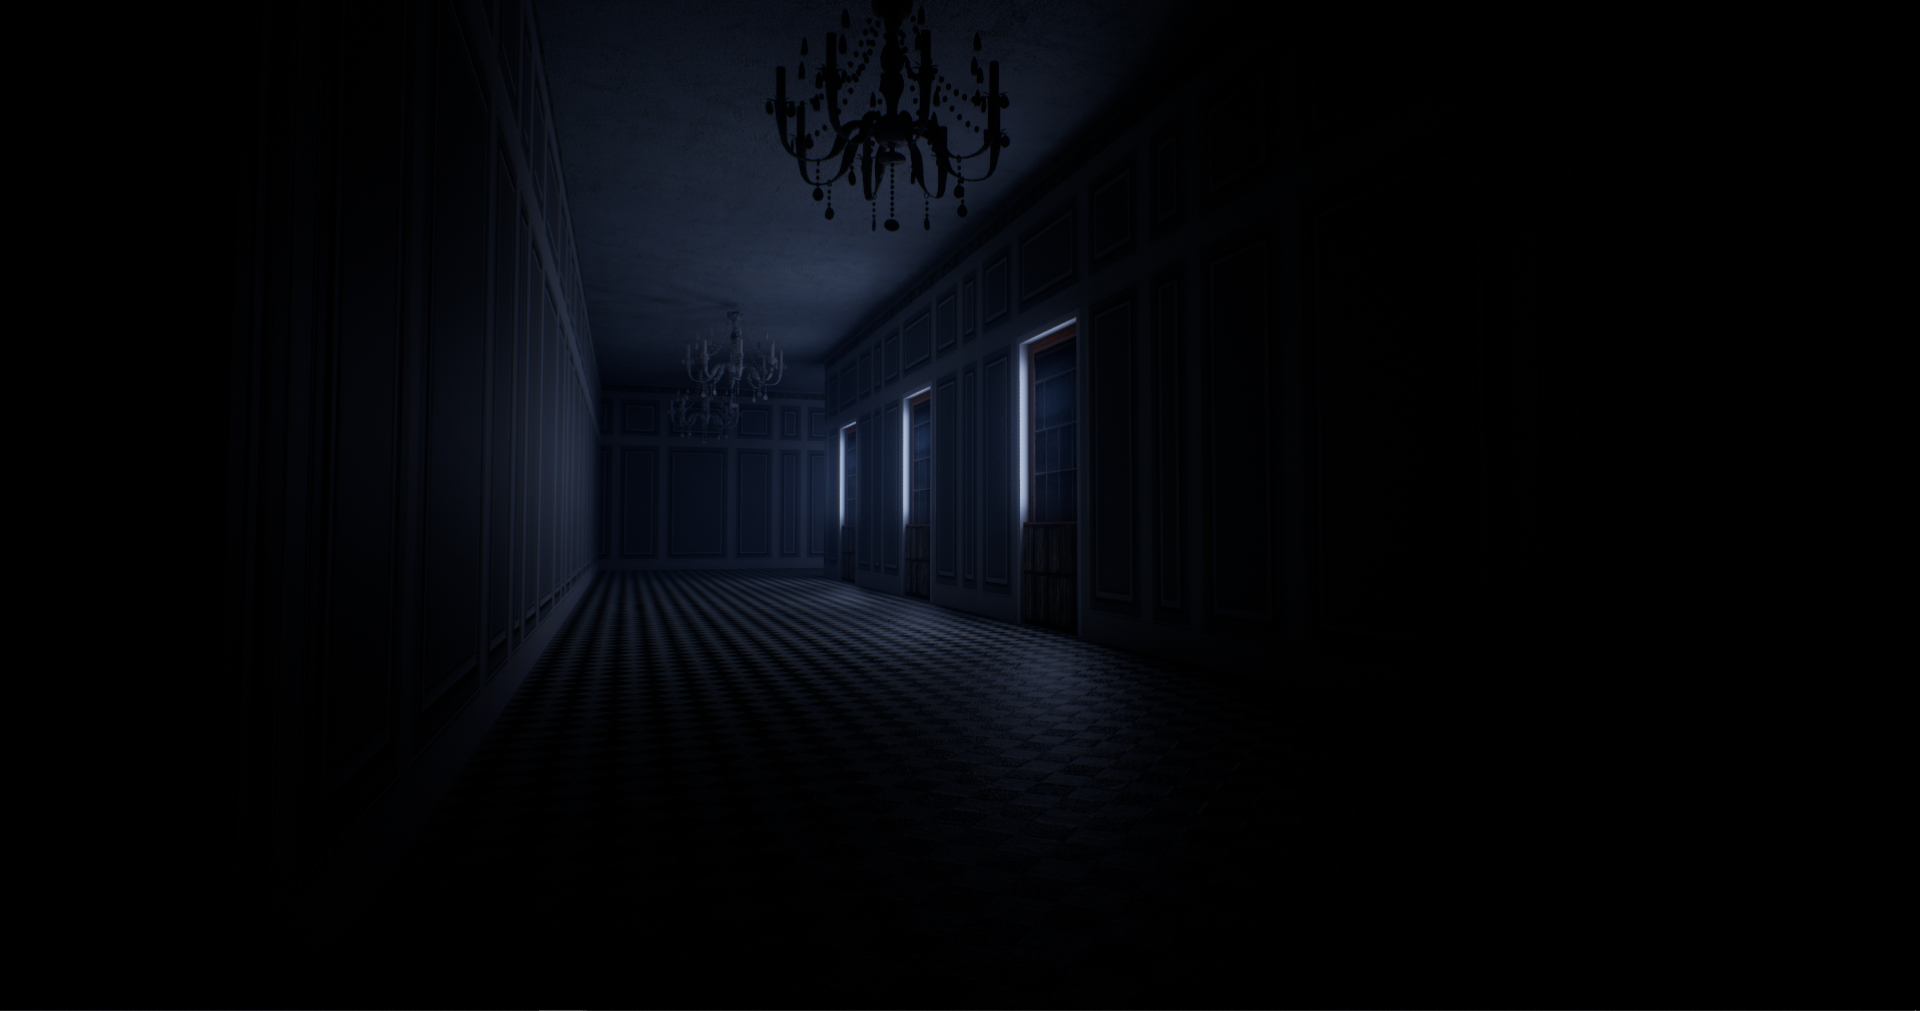 Eyes the horror game Remastered by vivmax